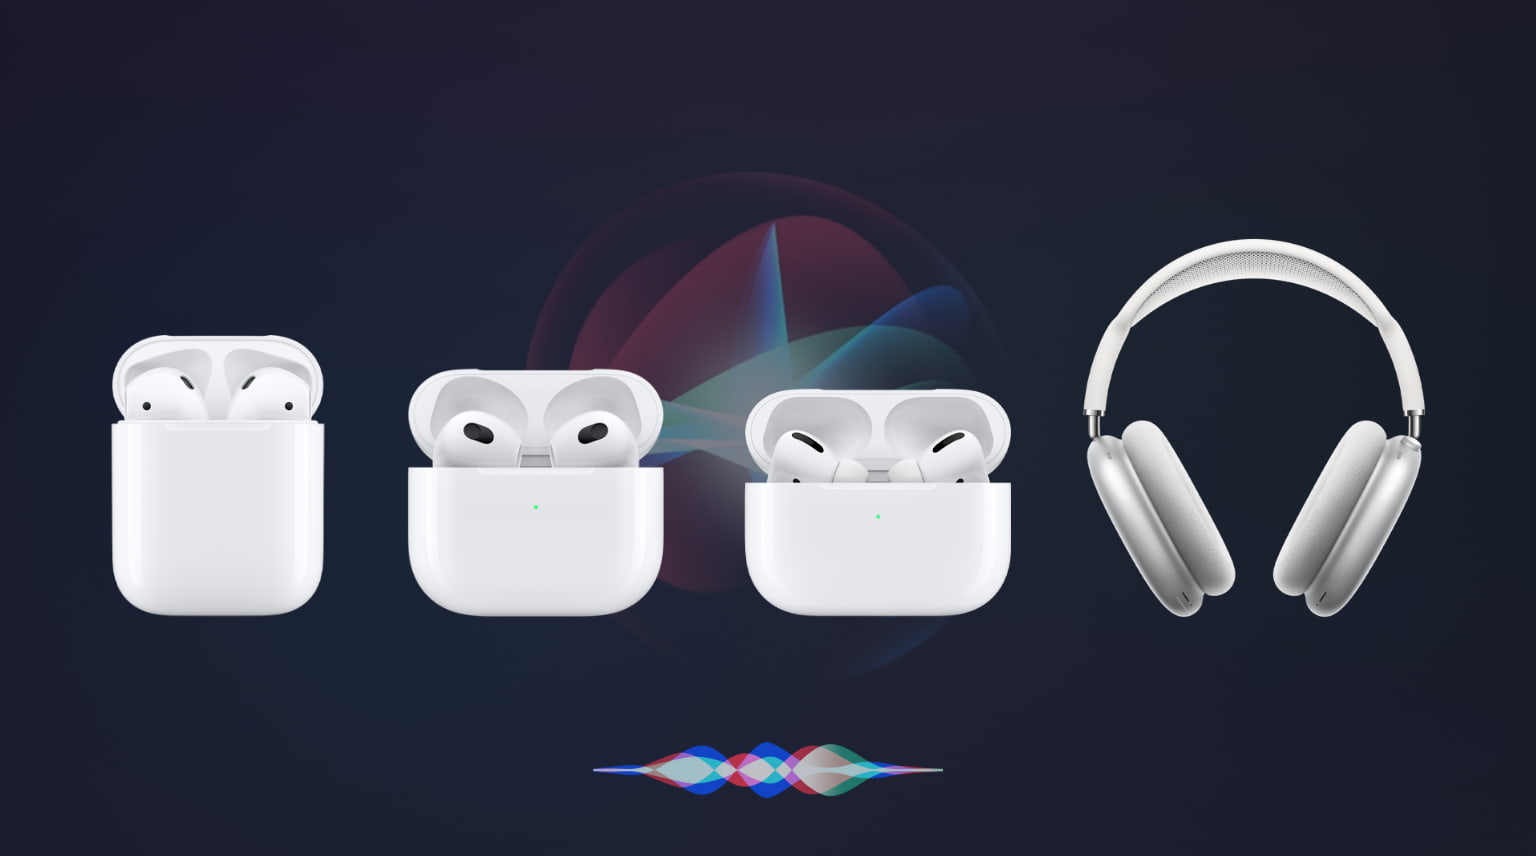 AirPods 1st, 2nd, 3rd generation, AirPods Pro, and AirPods Max with Siri icon in the background